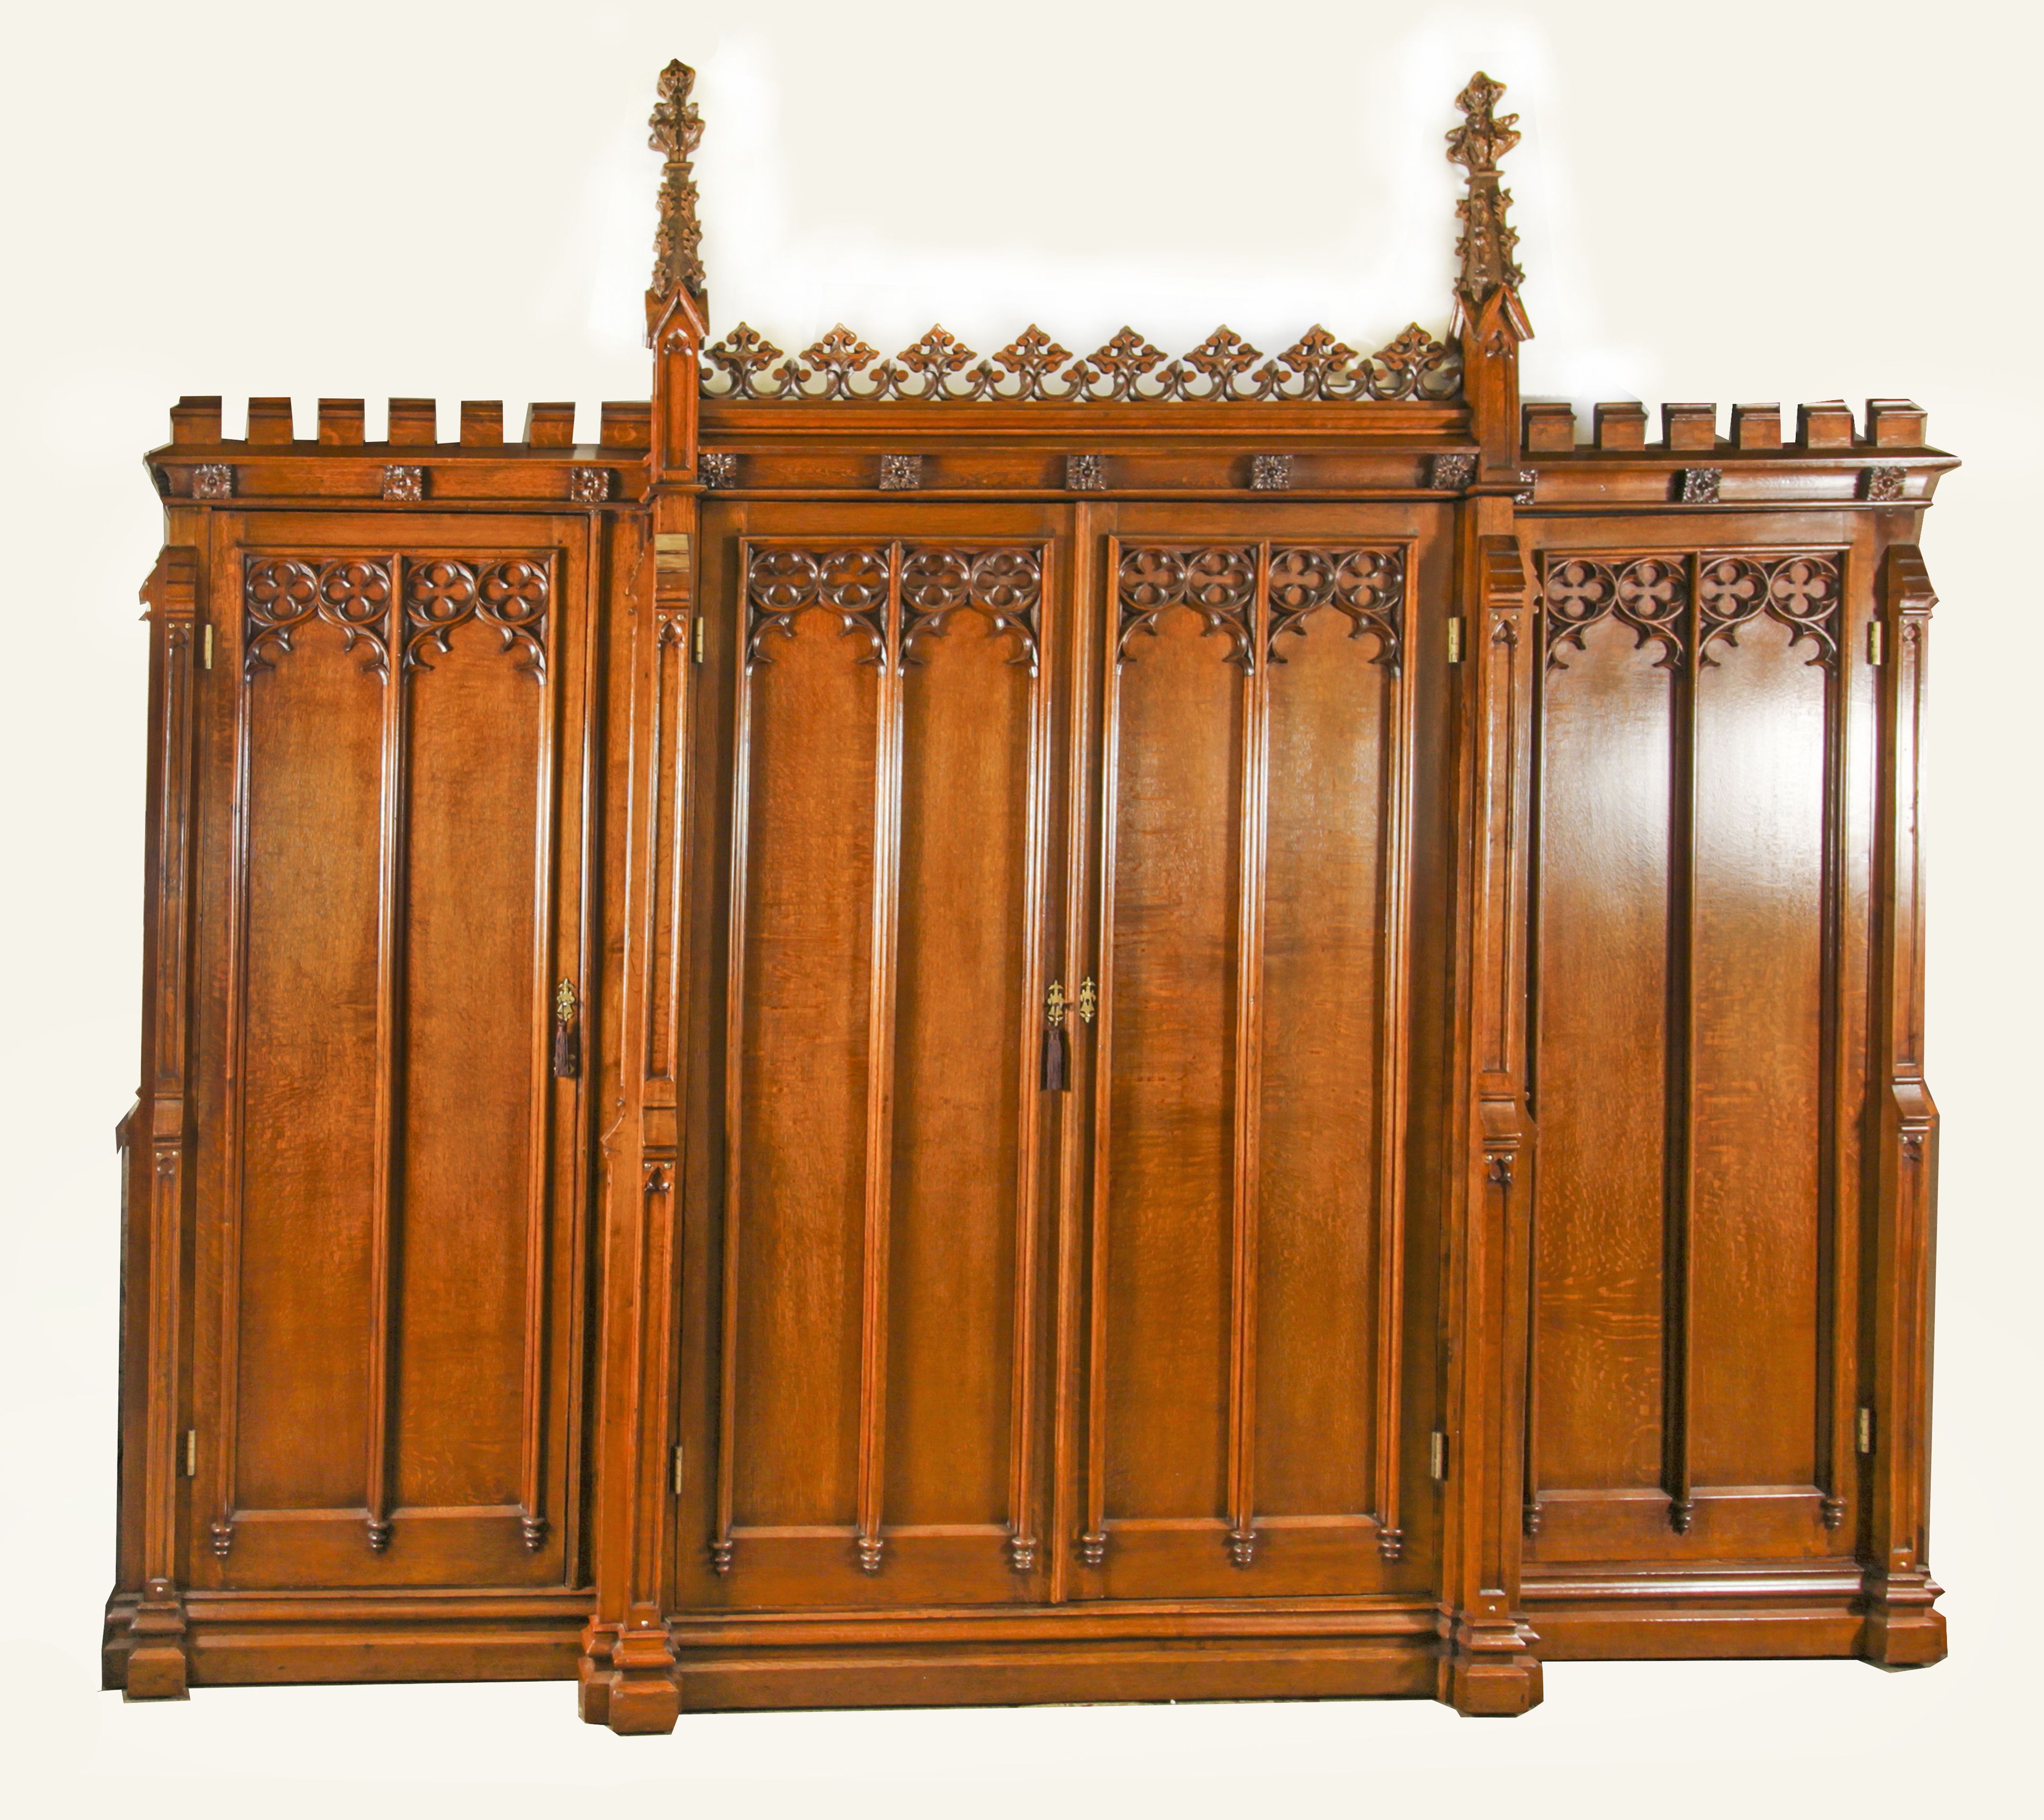 Antique Gothic Revival | Ref. No. A2310 | Regent Antiques With Regard To Victorian Breakfront Wardrobes (Gallery 13 of 20)